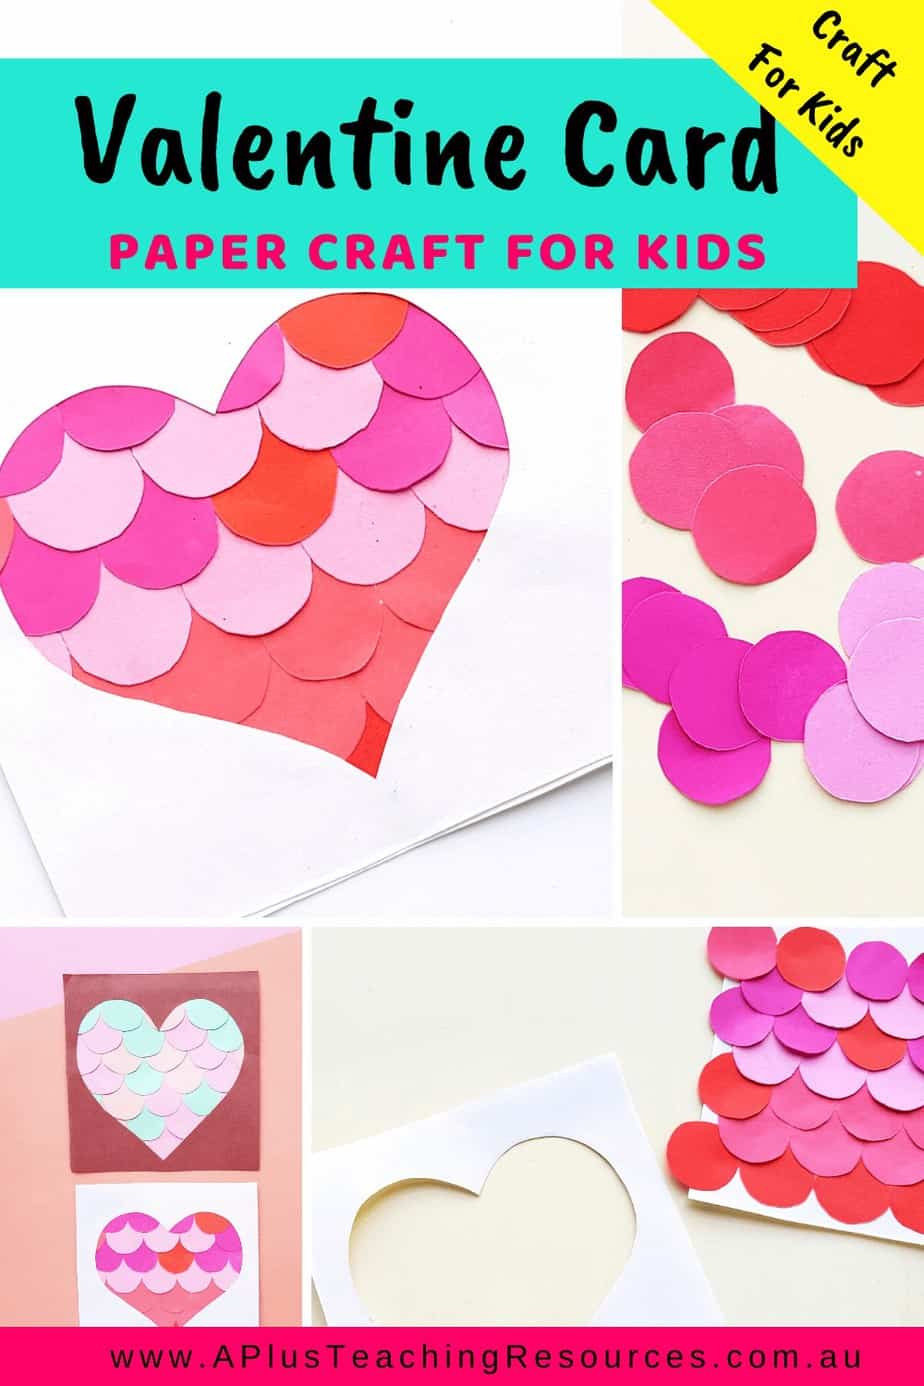 13 Creative Valentine's Day Crafts for Kids - SoCal Field Trips